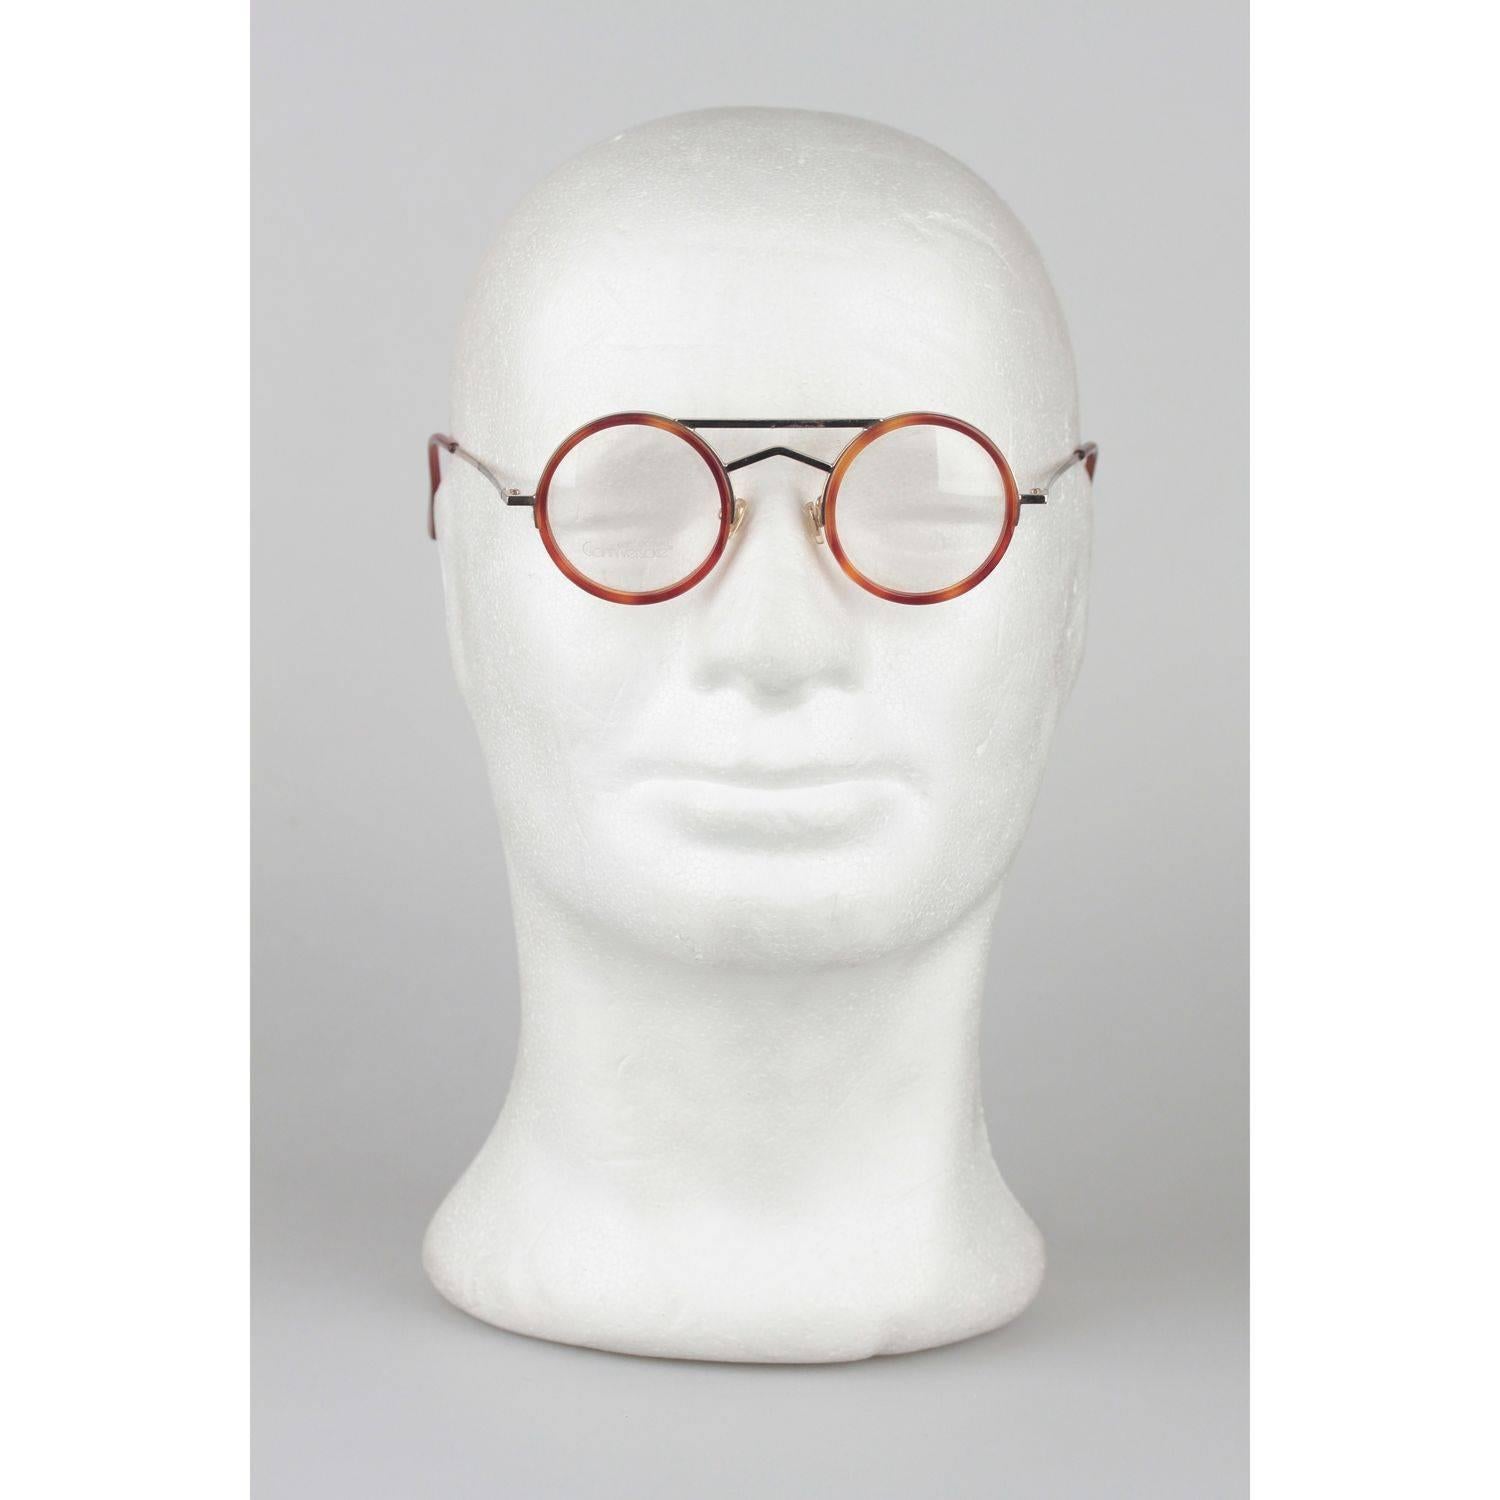 - Supercool round frames by Gianni Versace in the 1980s
Mod.620 - col. 945 - 42/22
-  Gold metal 6 tortoise brawn acetate  frame 
- Clear DEMO lenses 
- Cool double bridge structure and tortoise temple tips.
- Minimalist and smart